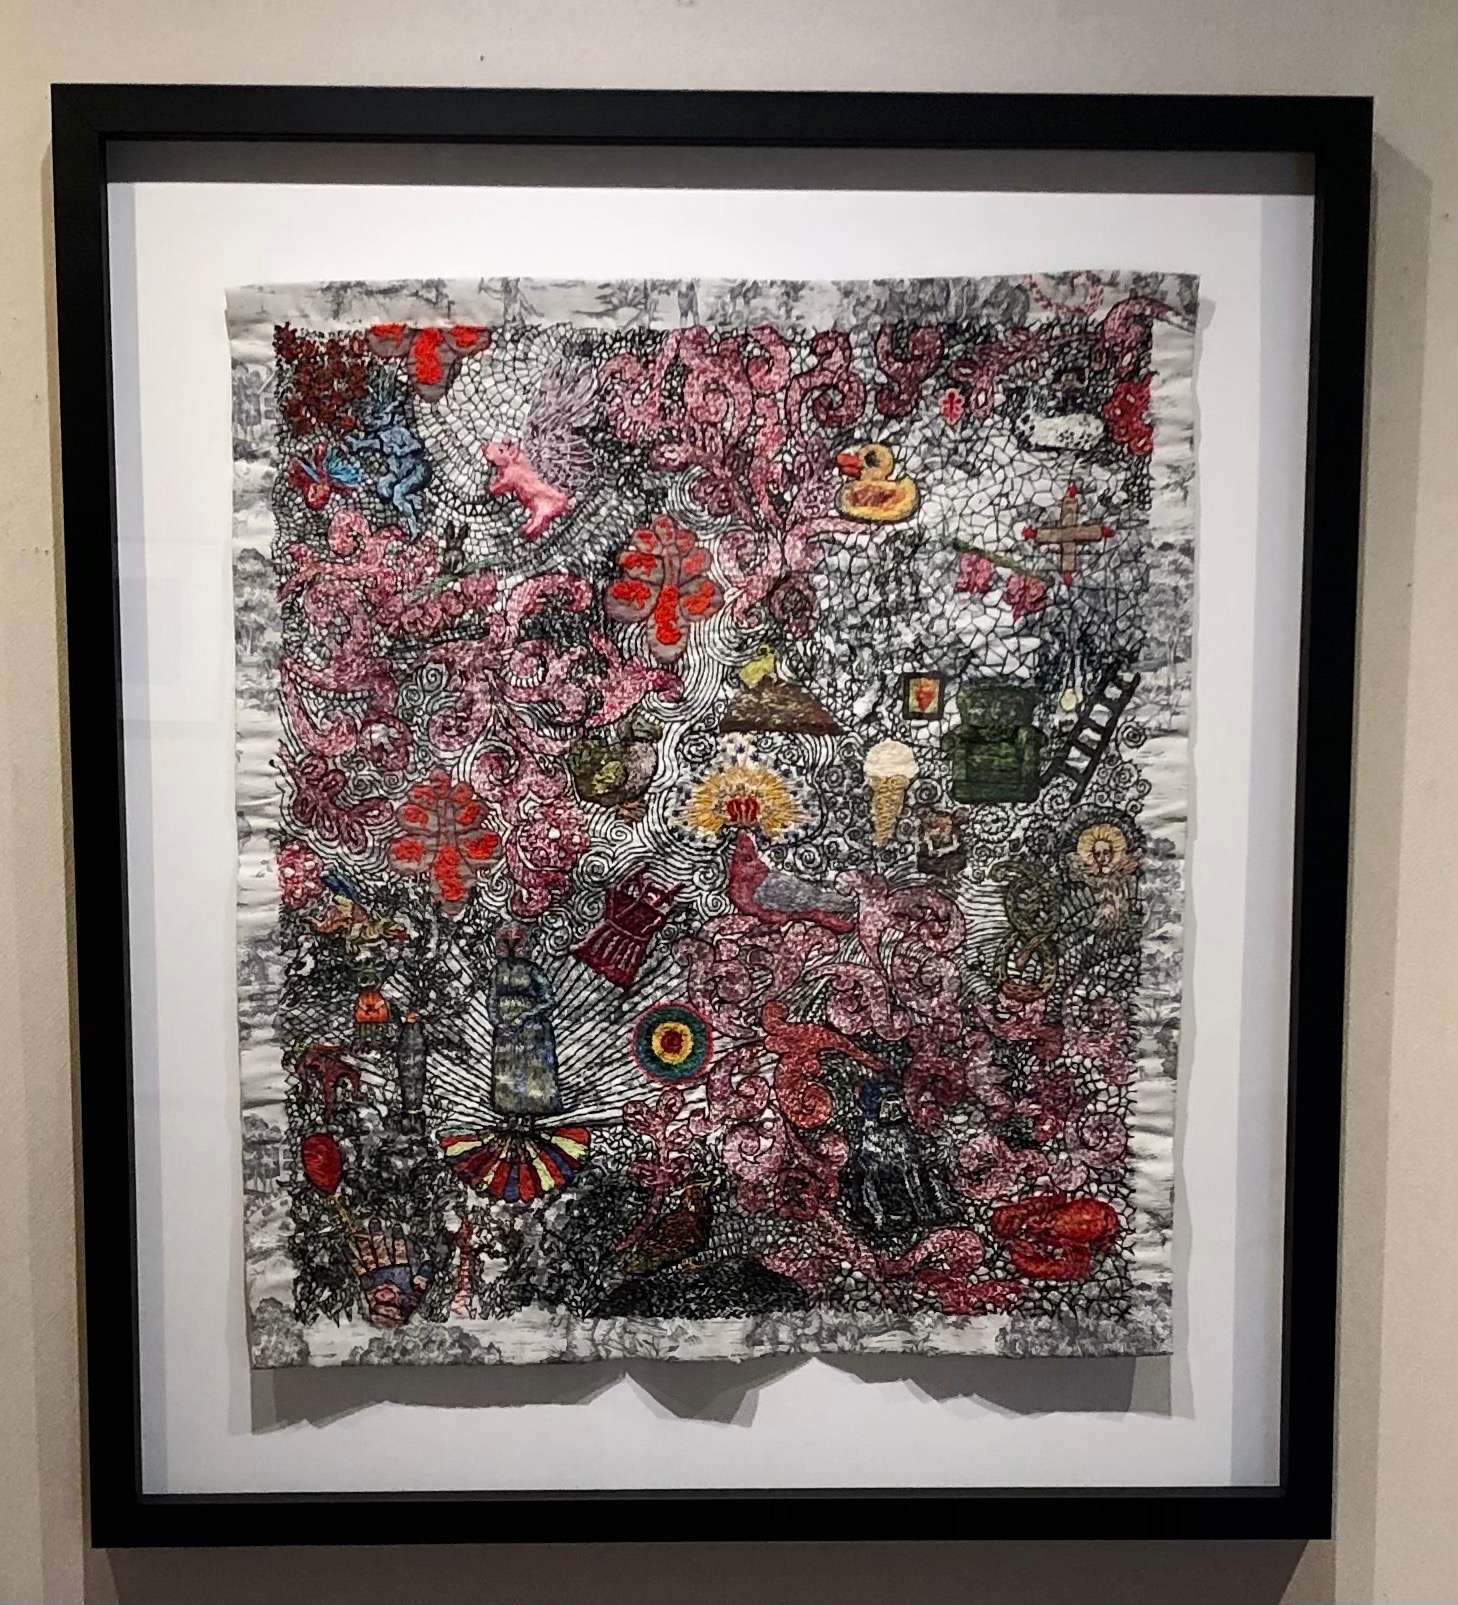 Alex Schofield…”Untitled”, Embroidery on fabric, showing at Galerie12